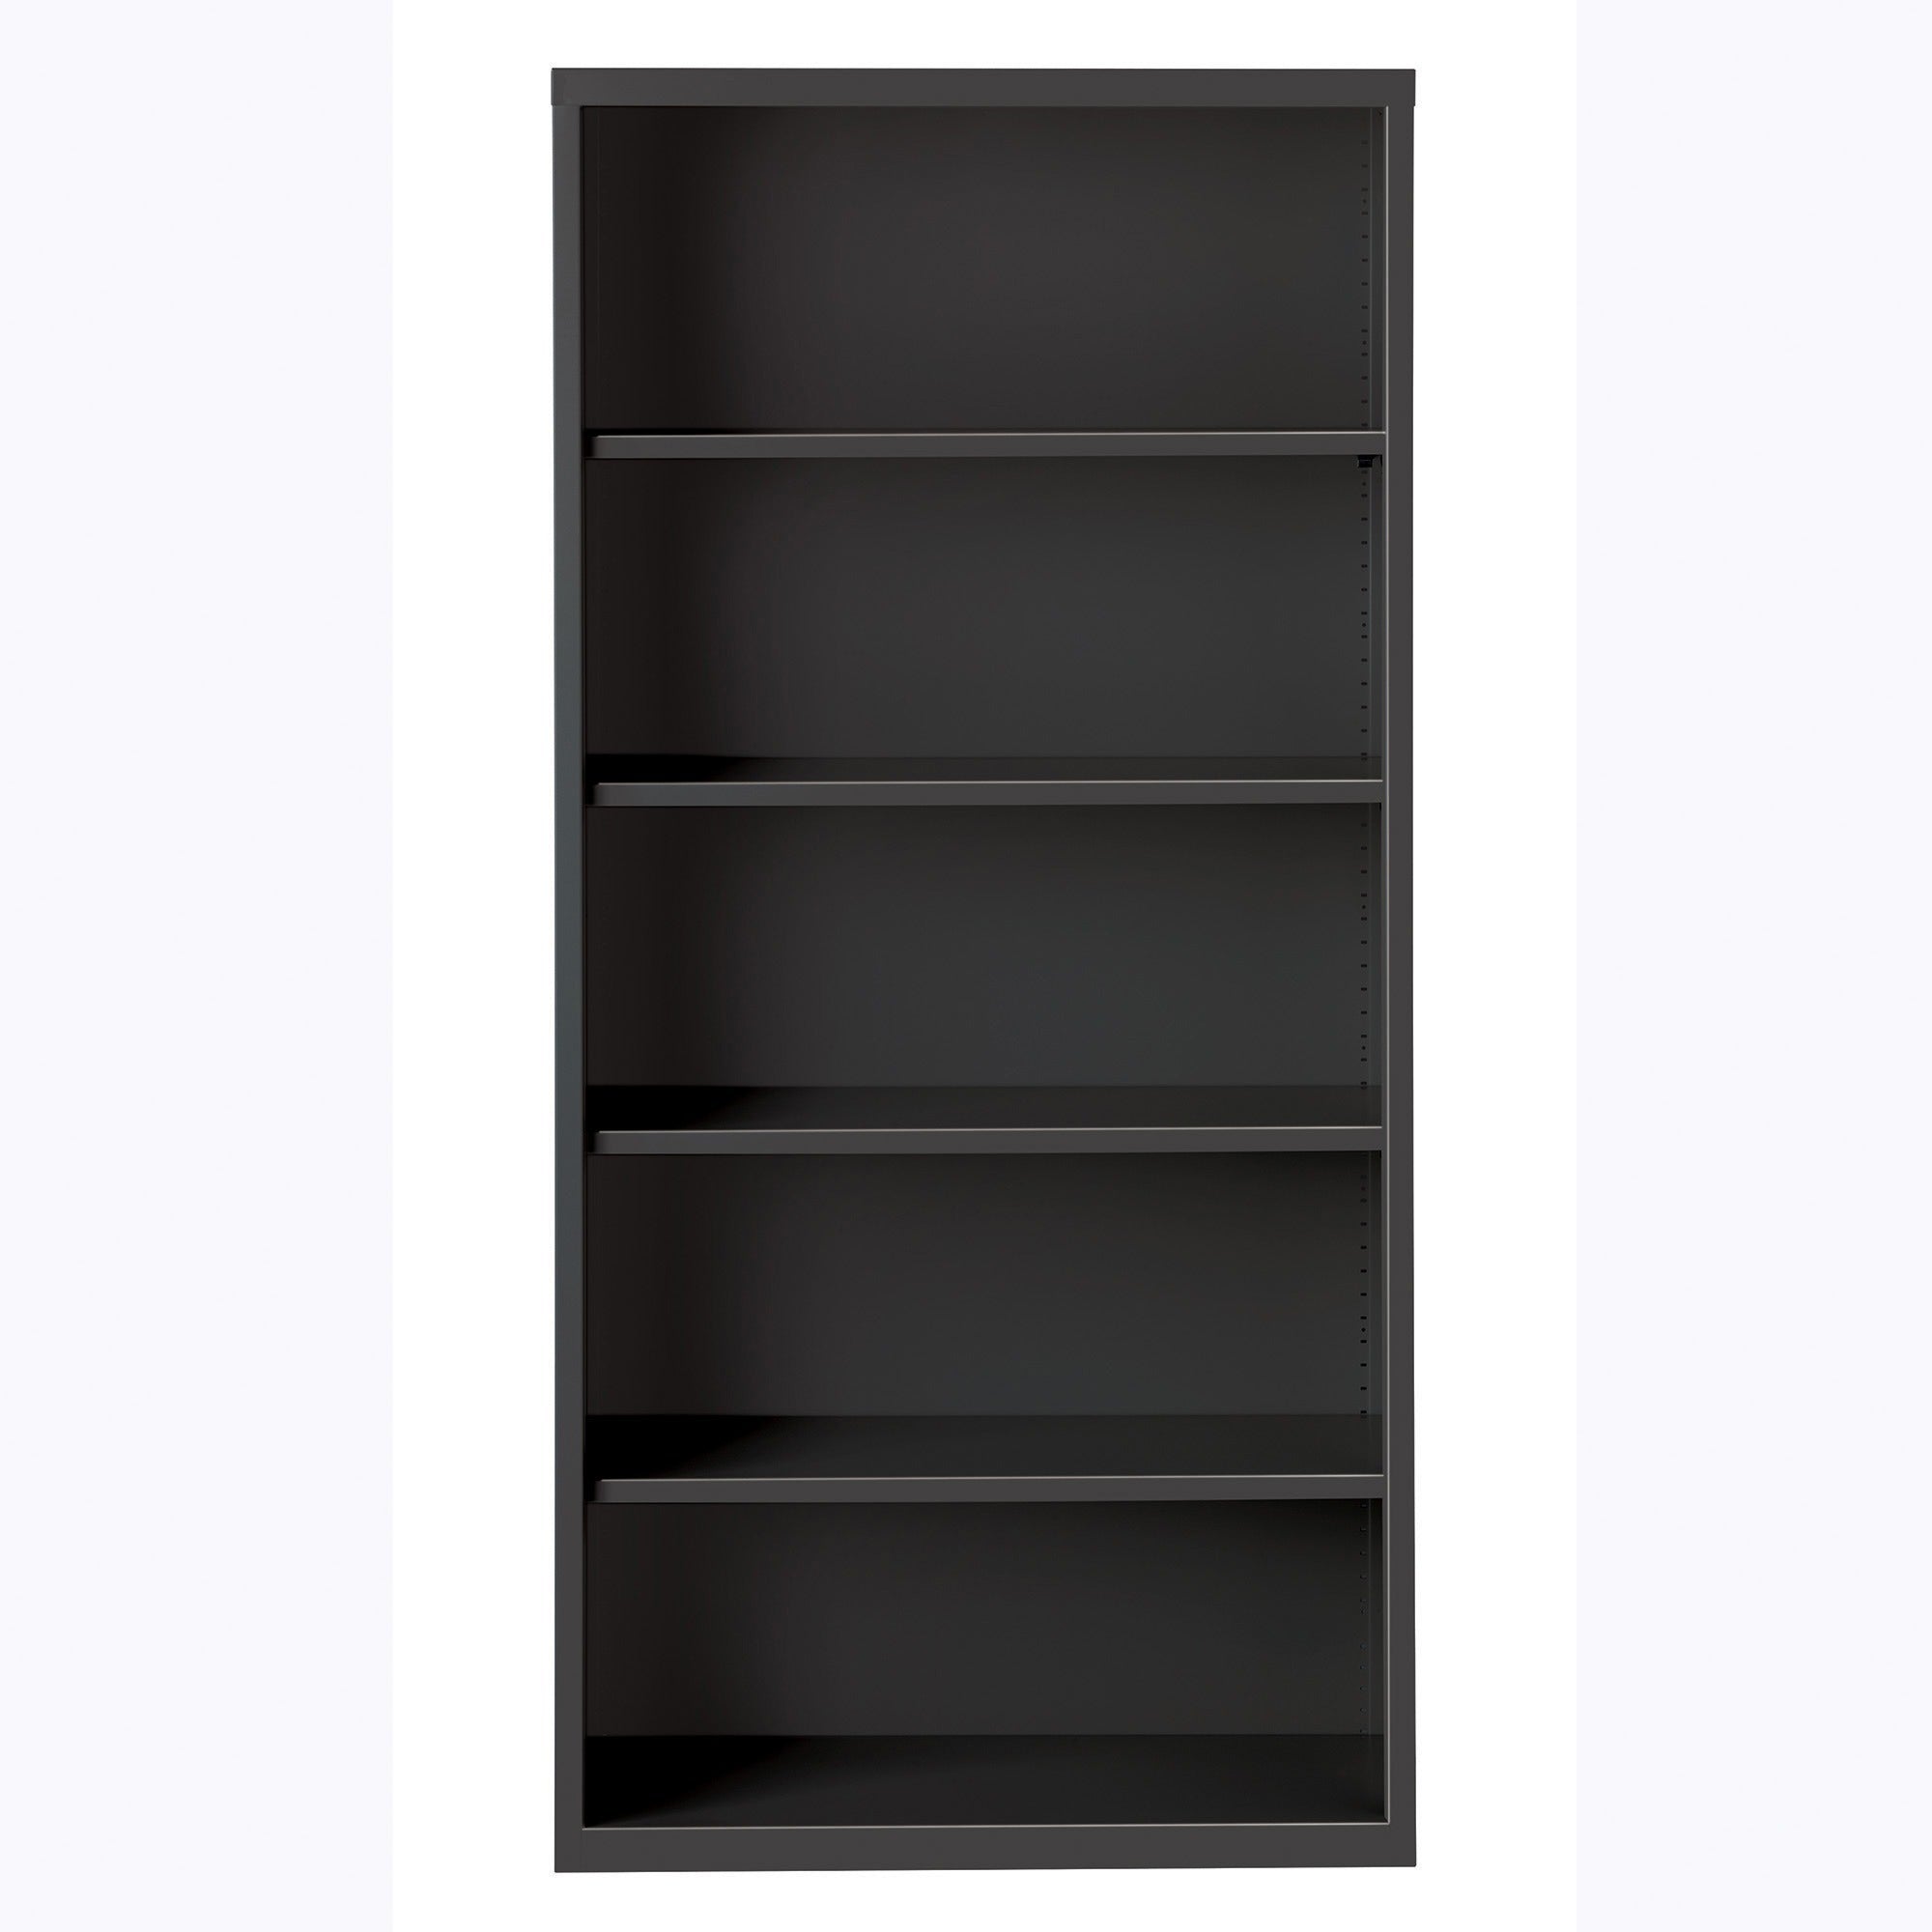 Lorell Fortress Series Bookcase - 34.5" x 13"72" - 5 Shelve(s) - Material: Steel - Finish: Charcoal, Powder Coated - Adjustable Shelf, Welded, Durable - 2